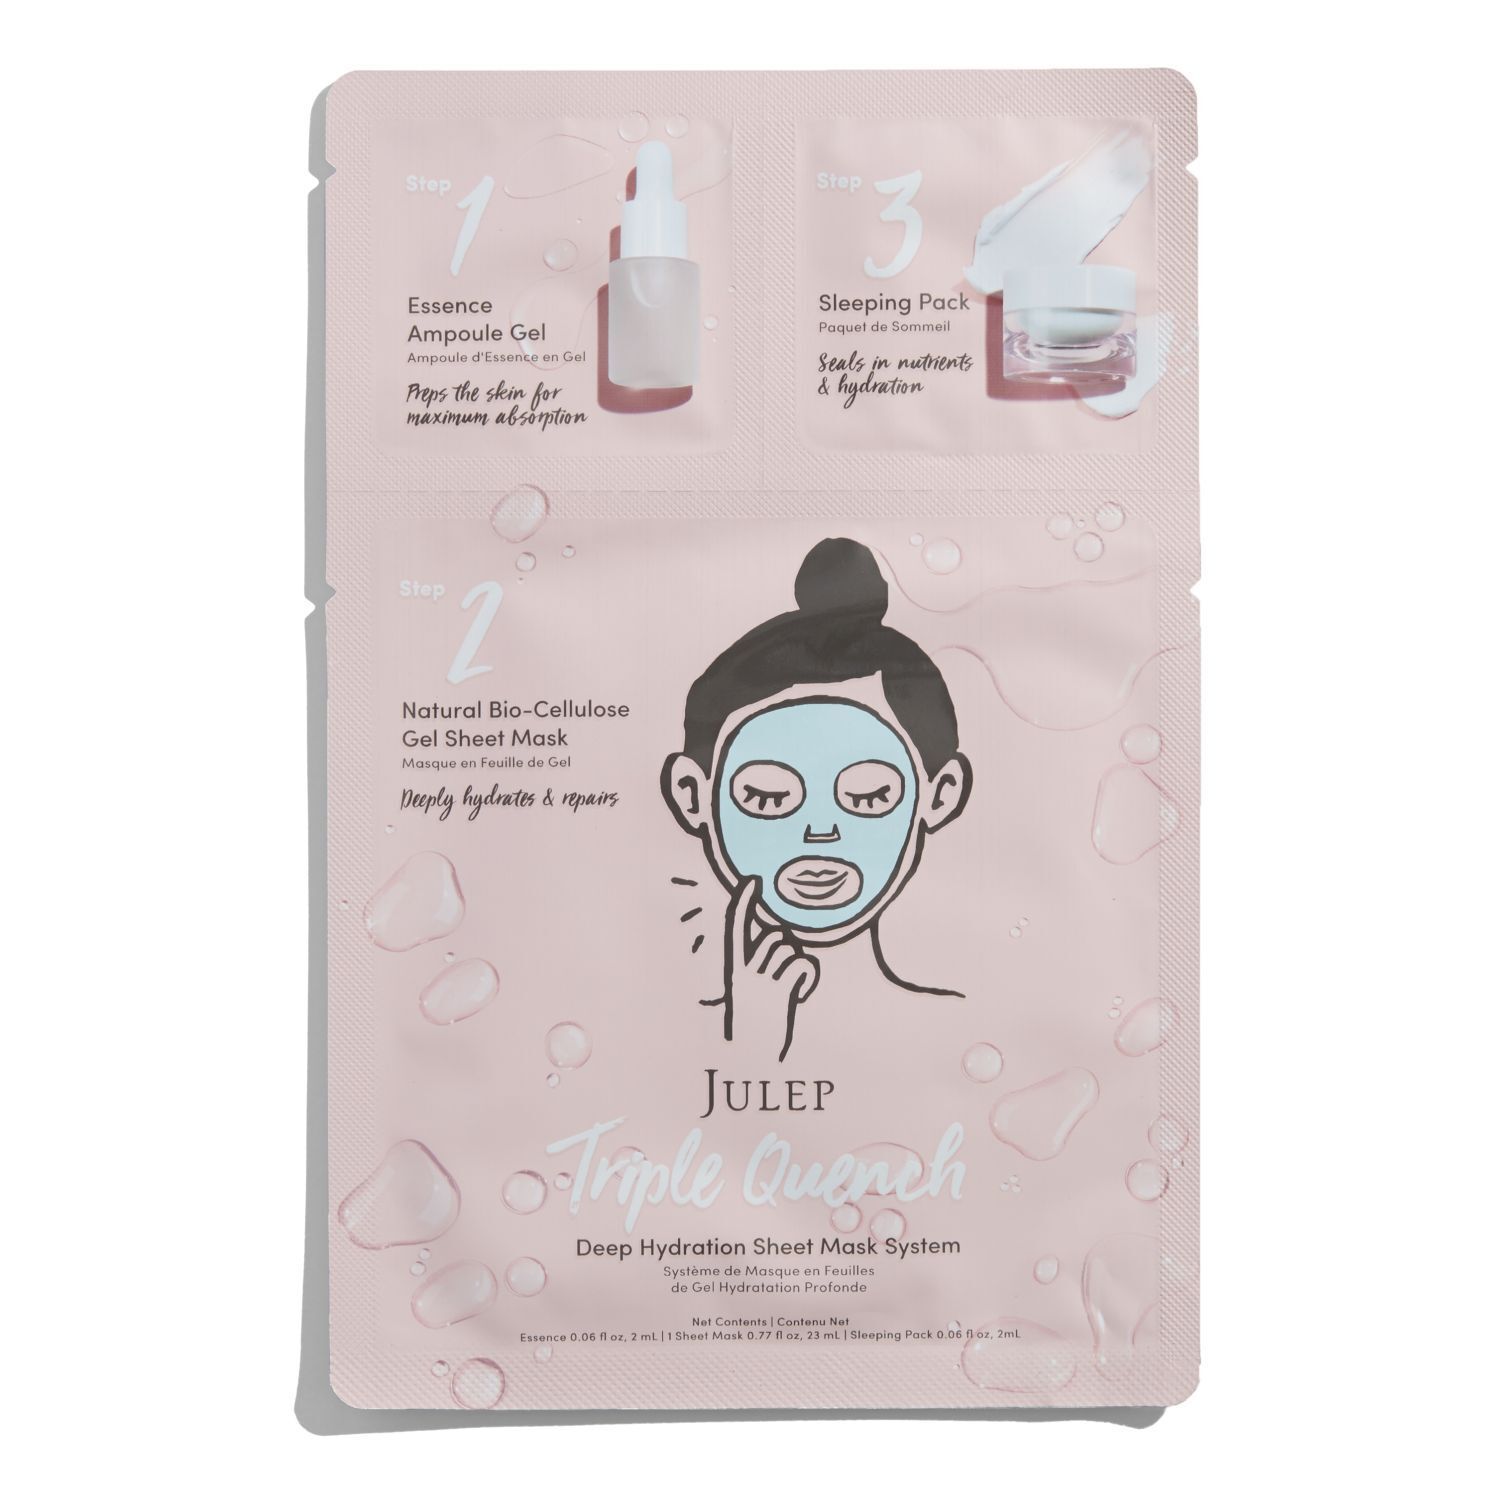 Julep - Triple Quench Deep Hydration Sheet Mask System